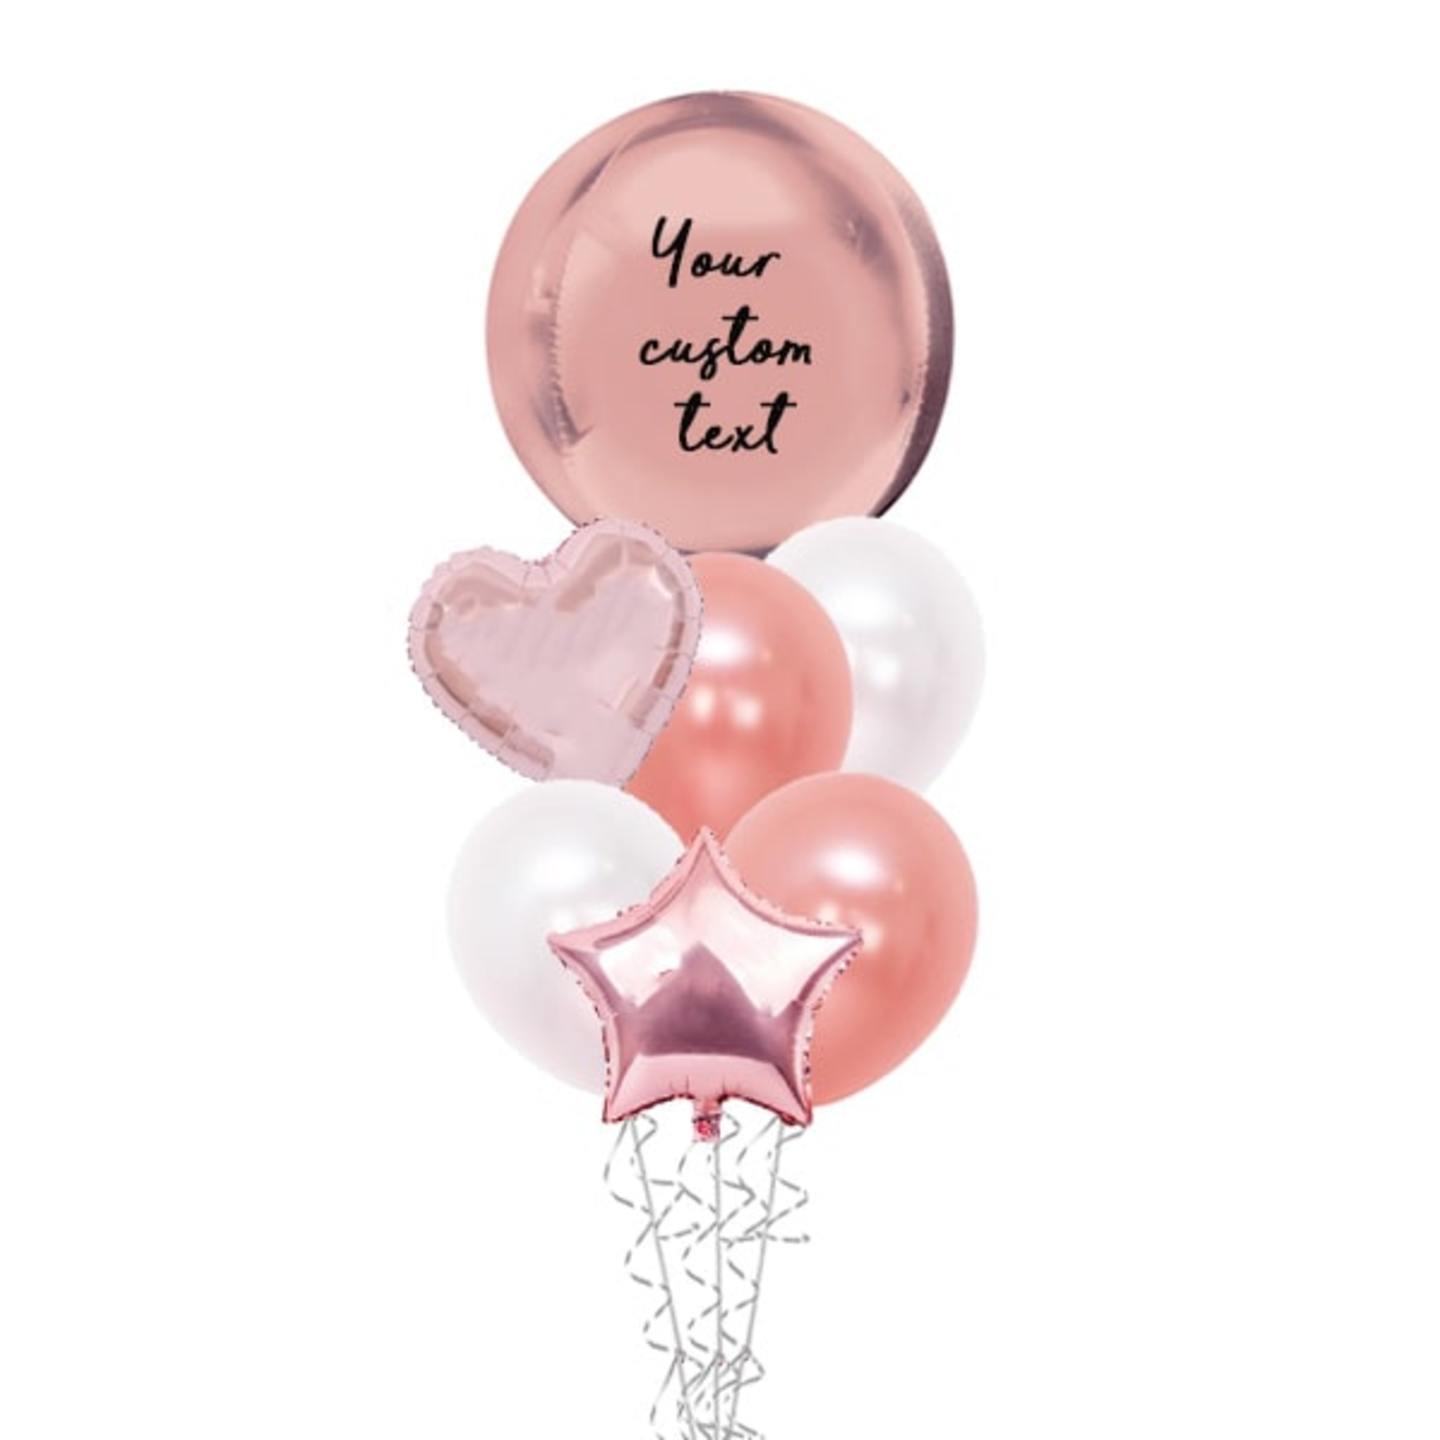 Orbz Balloon Package - BLUE ROSE GOLD